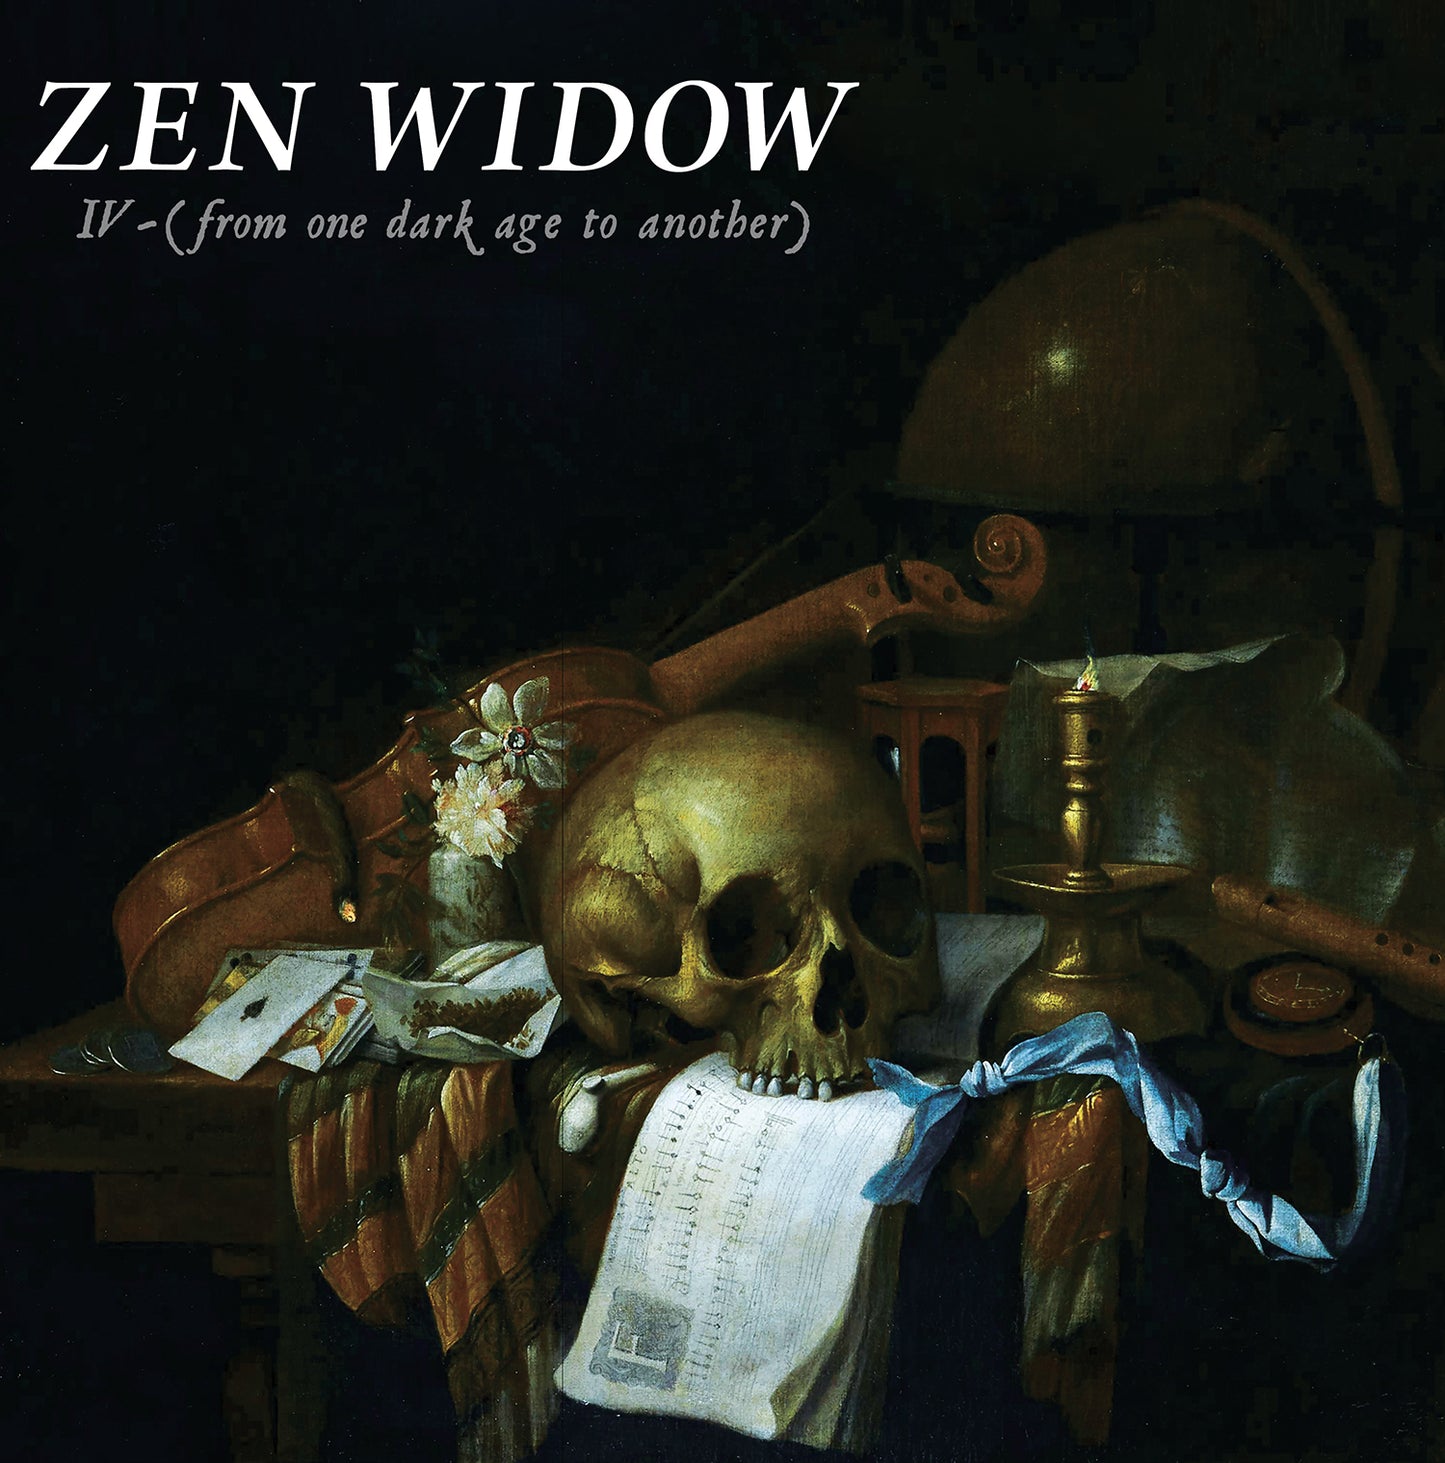 Zen Widow "IV (from one dark age to another)" 180G LP (SHIPPING NOW!)